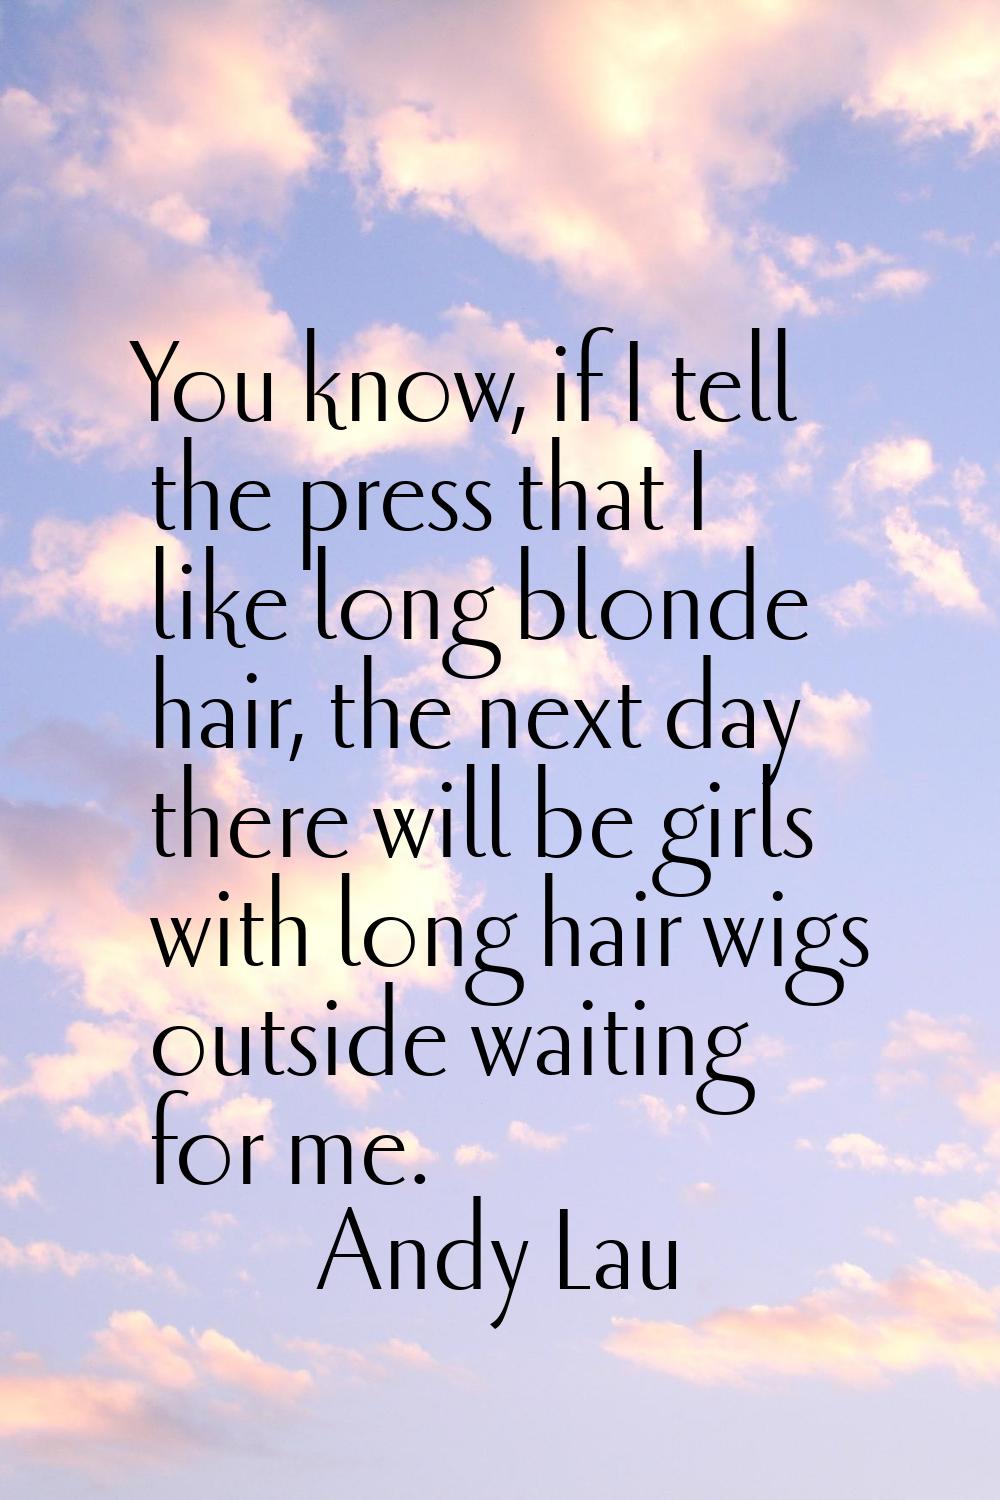 You know, if I tell the press that I like long blonde hair, the next day there will be girls with l